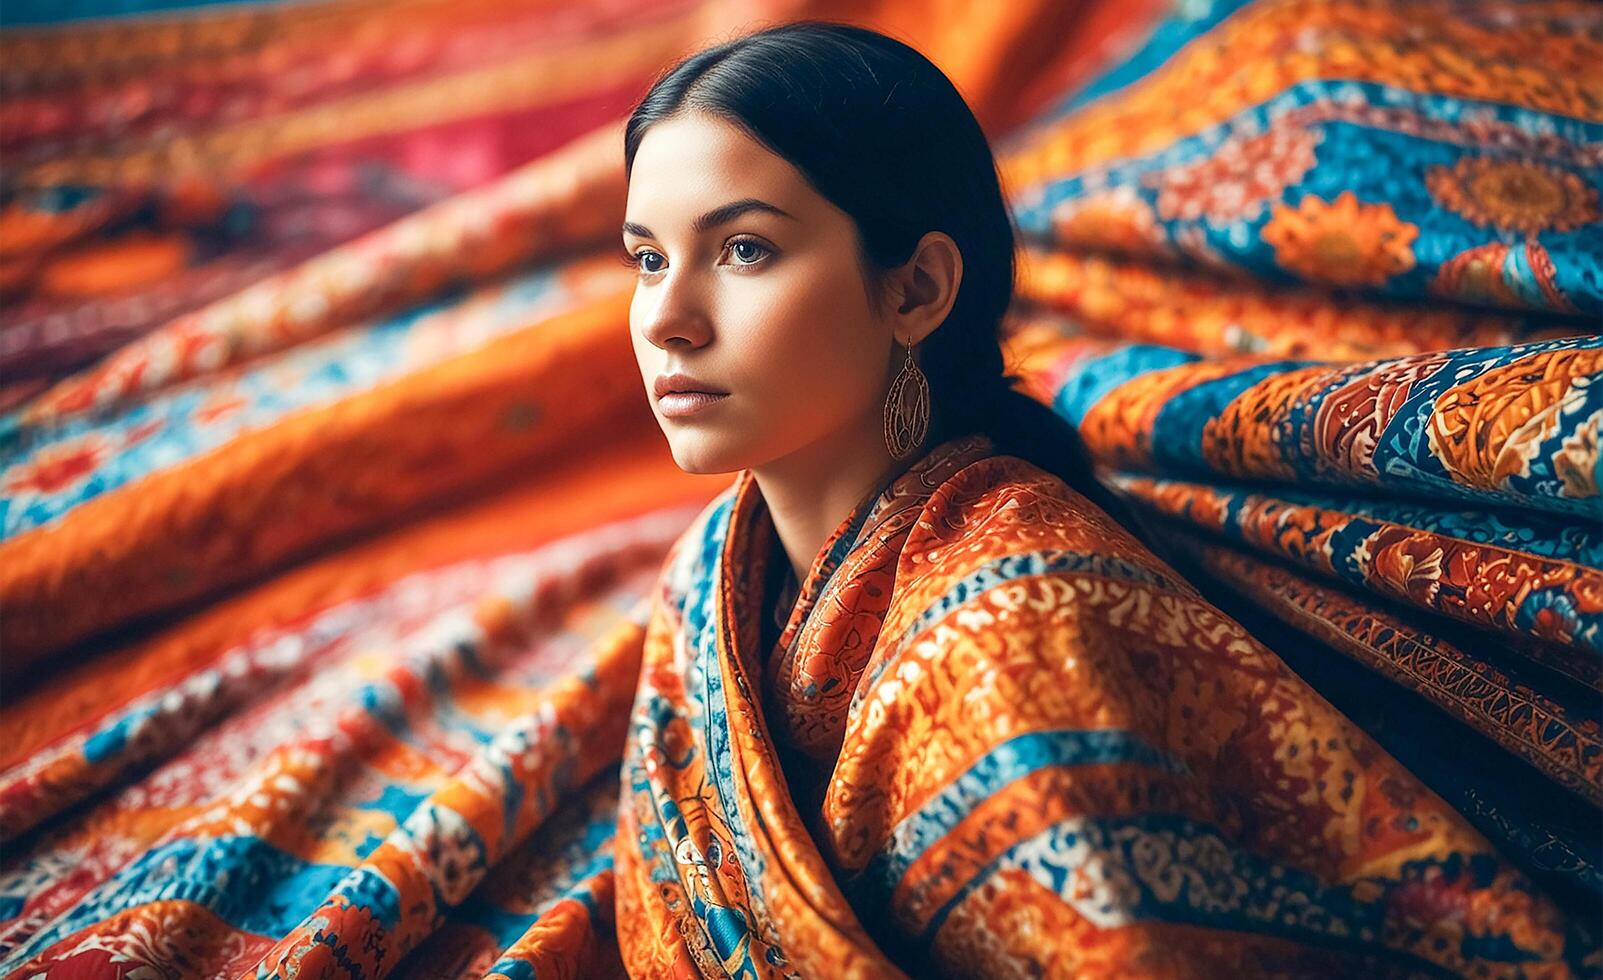 Beautiful women wear traditional cloth with beautiful colors and patterns. photo